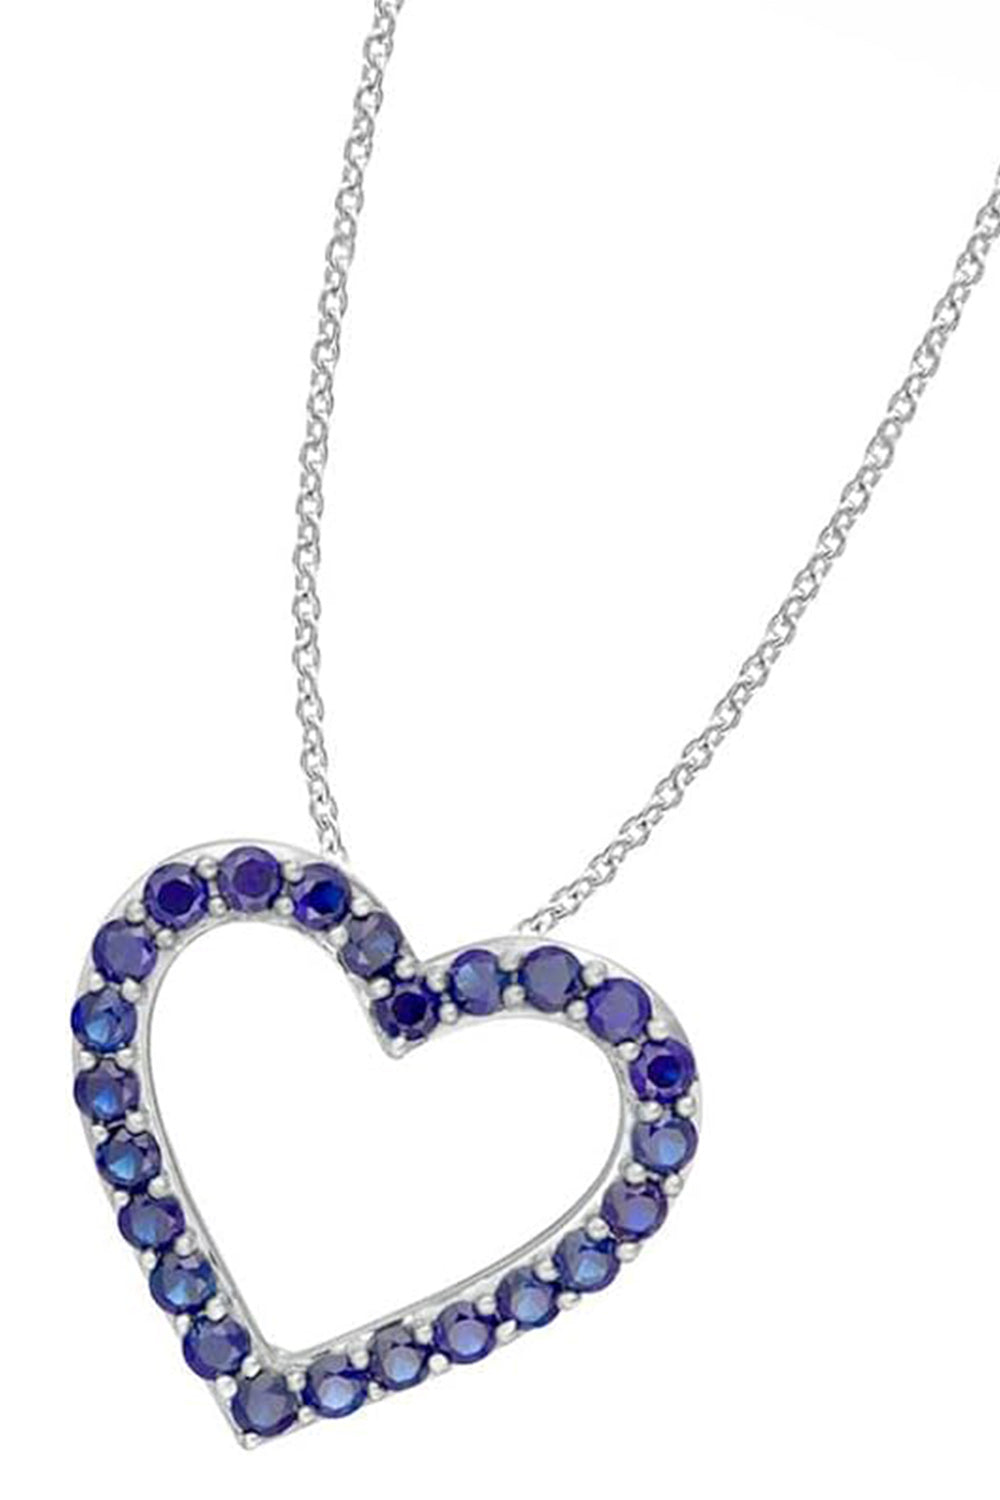 White Gold Chain with Blue Sapphire Open Heart Pendant